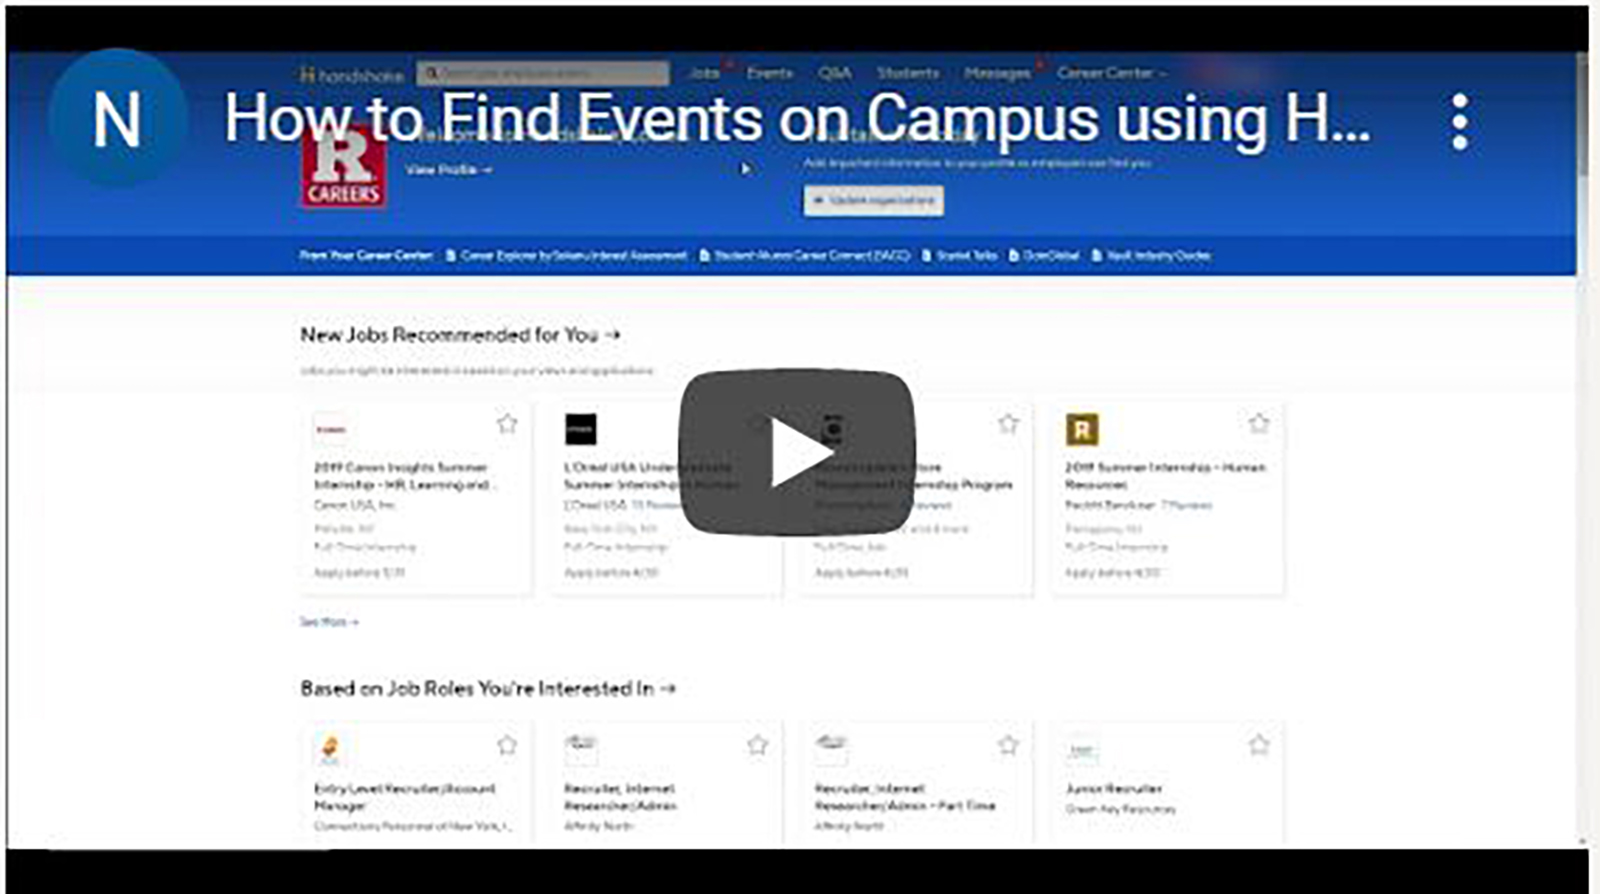 How to Find Events on Campus using Handshake